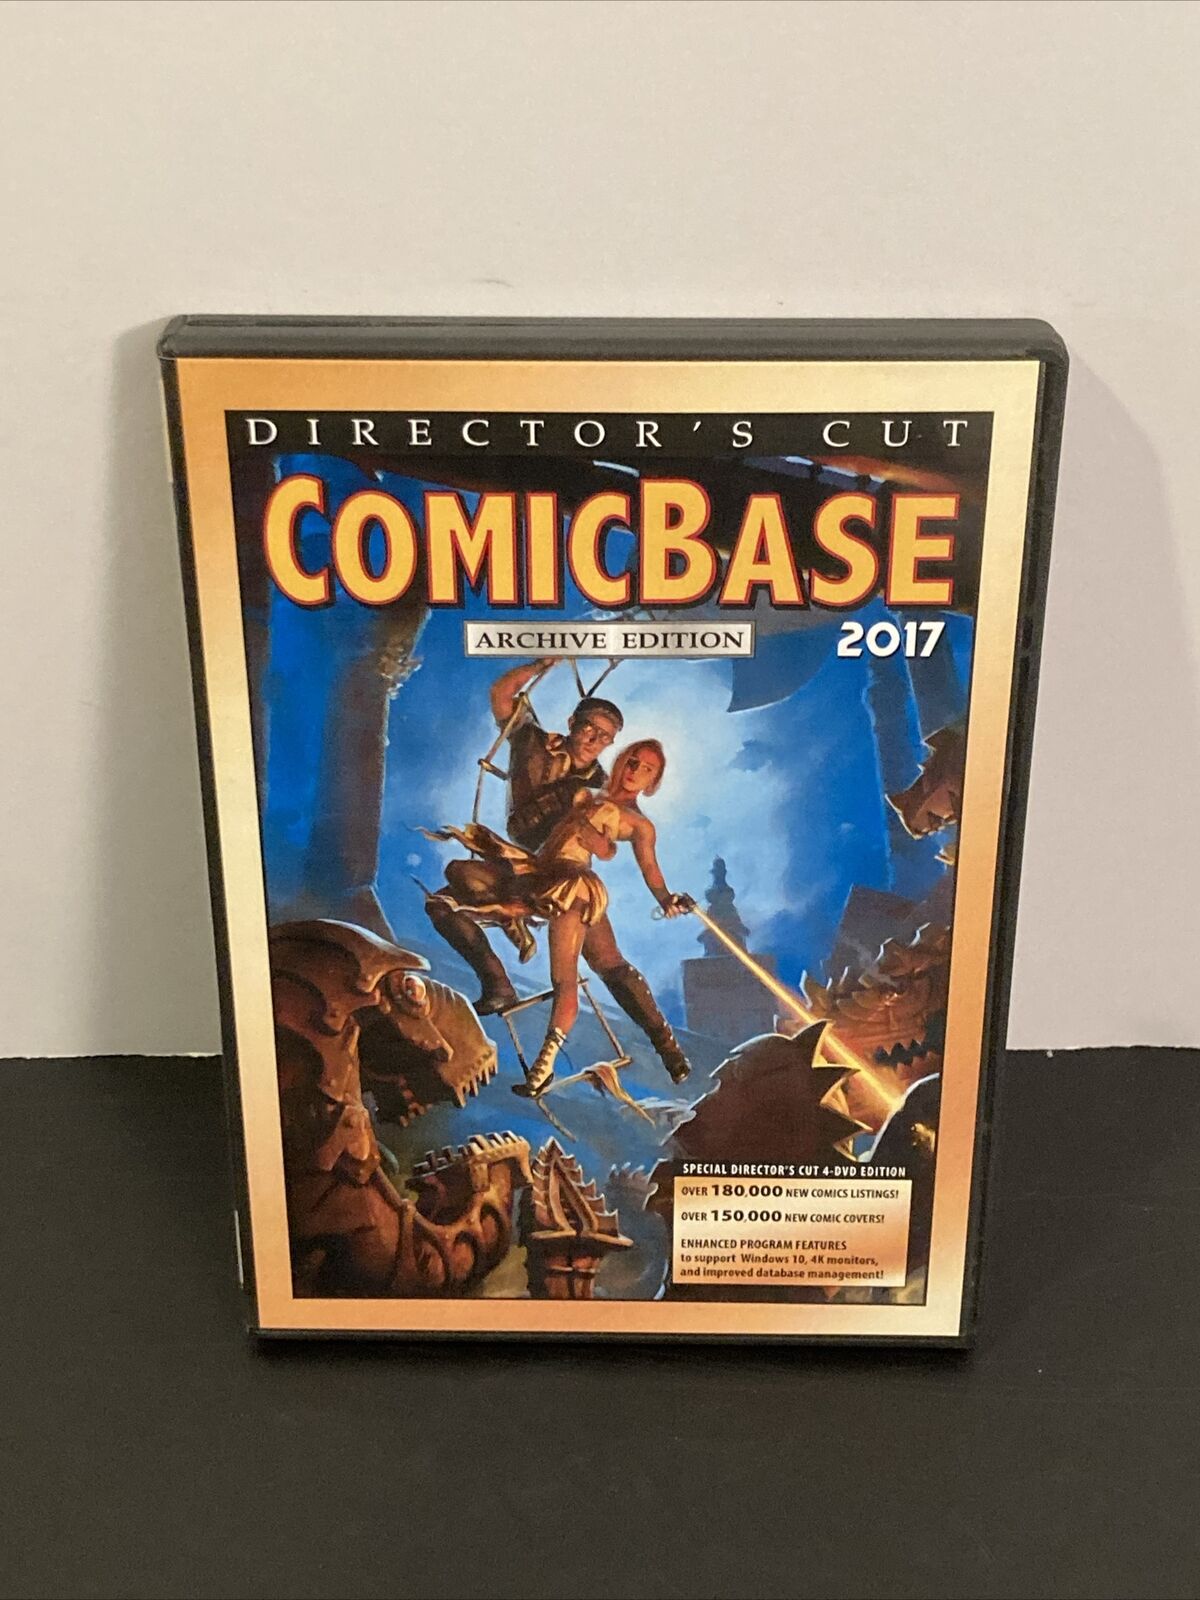 ComicBase 2017 DVD(4 Disc Set) ARCHIVE EDITION Software